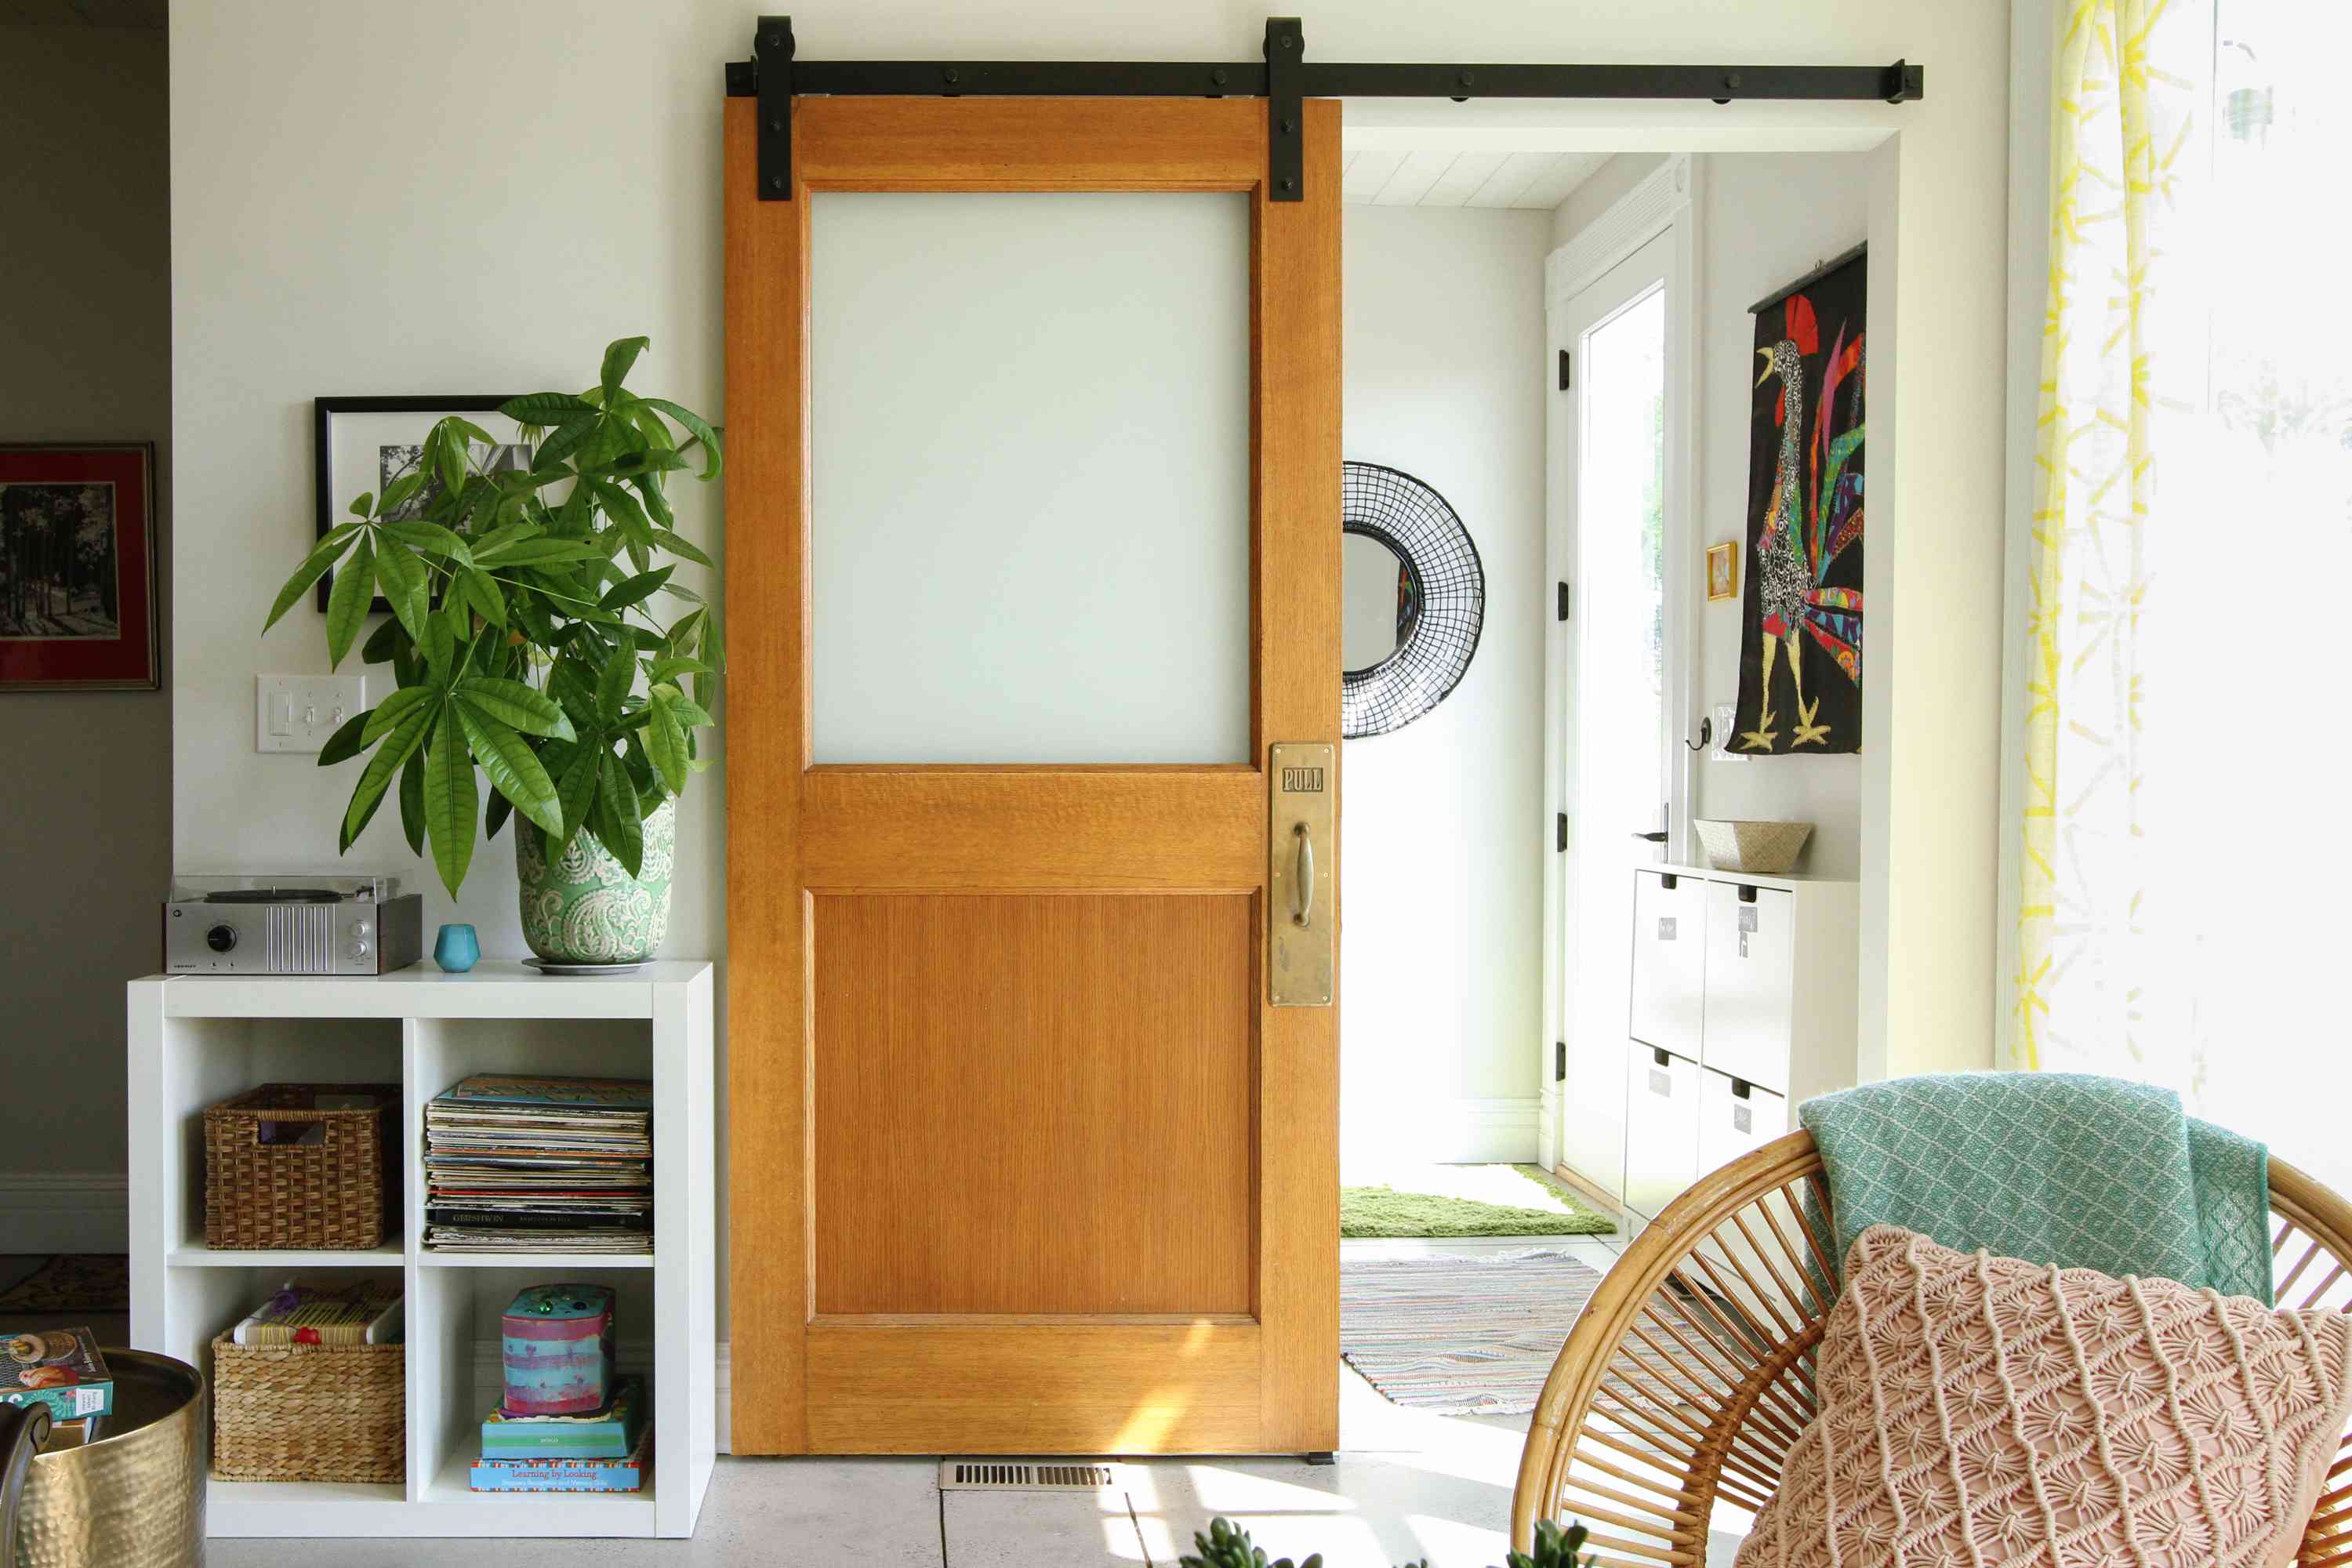 DIY Barn Door: Step-by-Step Guide To Building Your Own